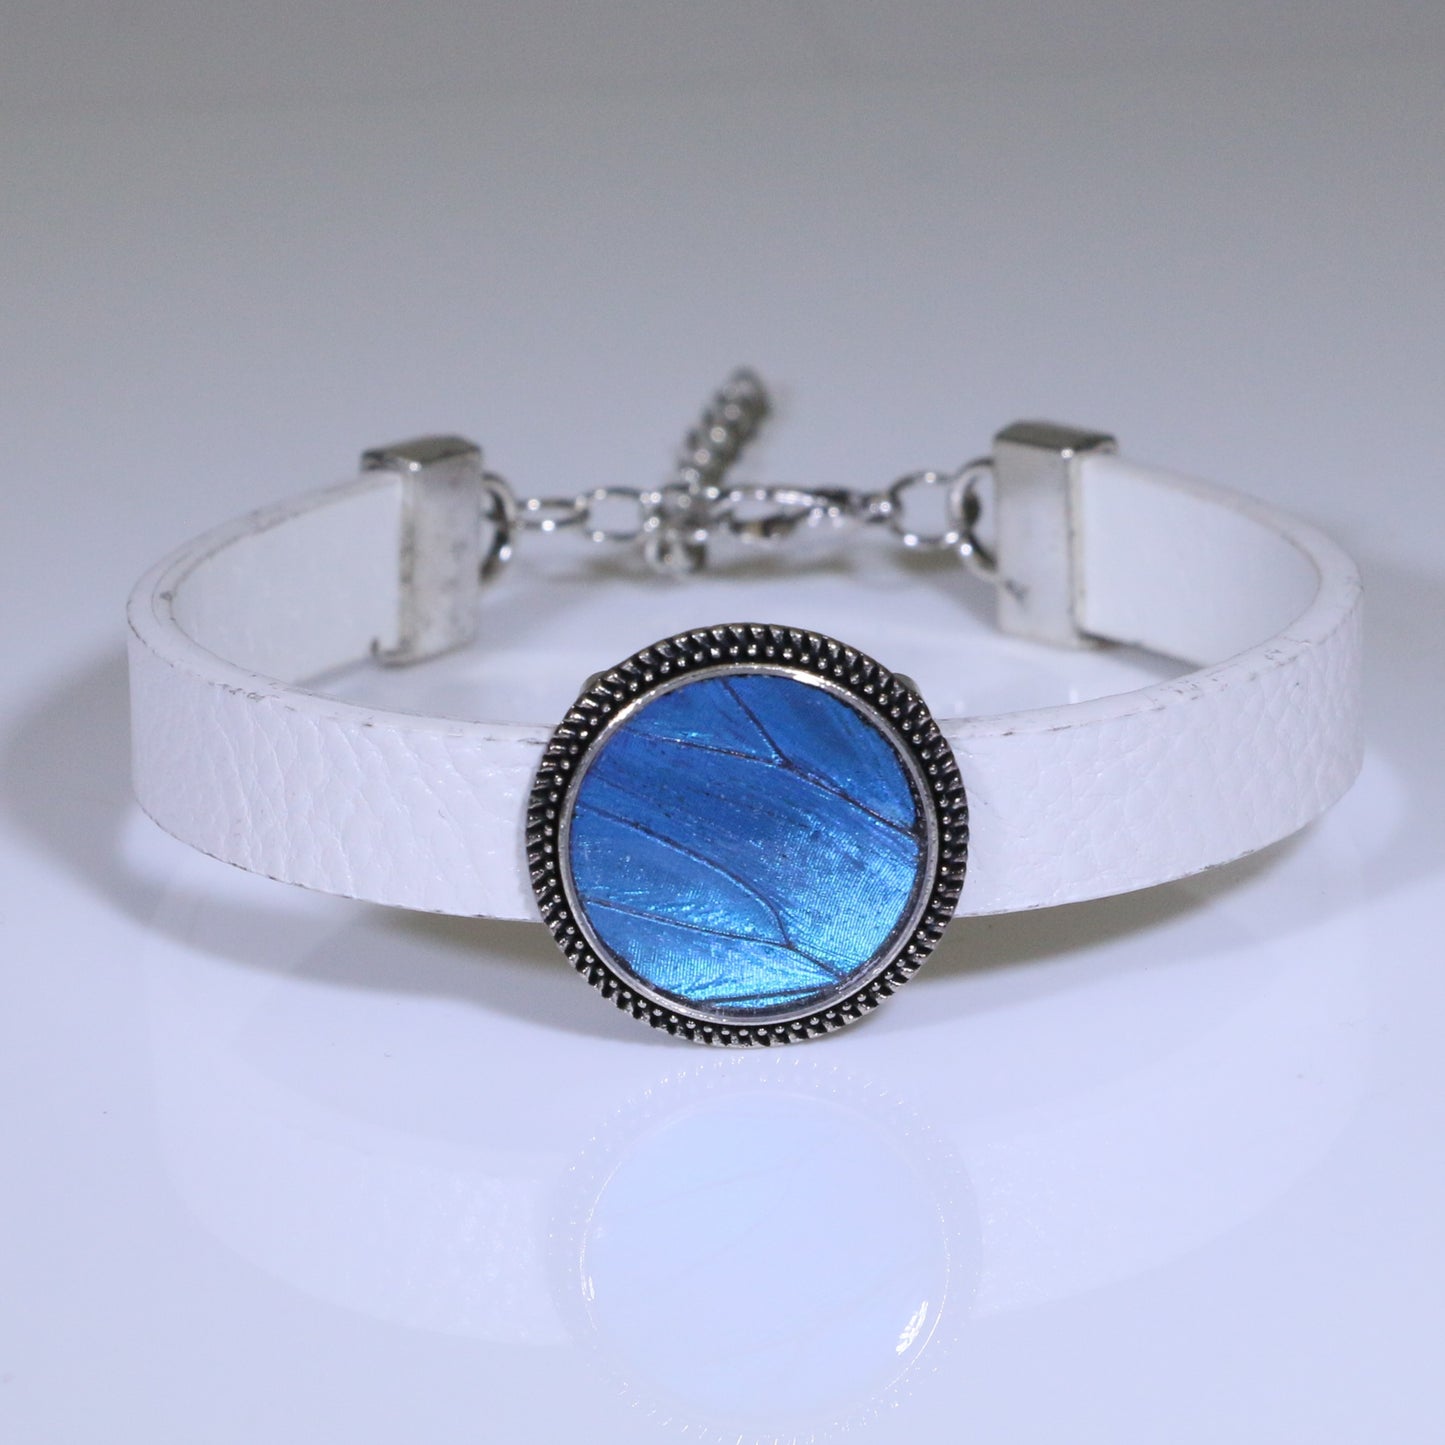 53001 - Real Butterfly Wing Jewelry - Bracelet Collection - Blue Morpho